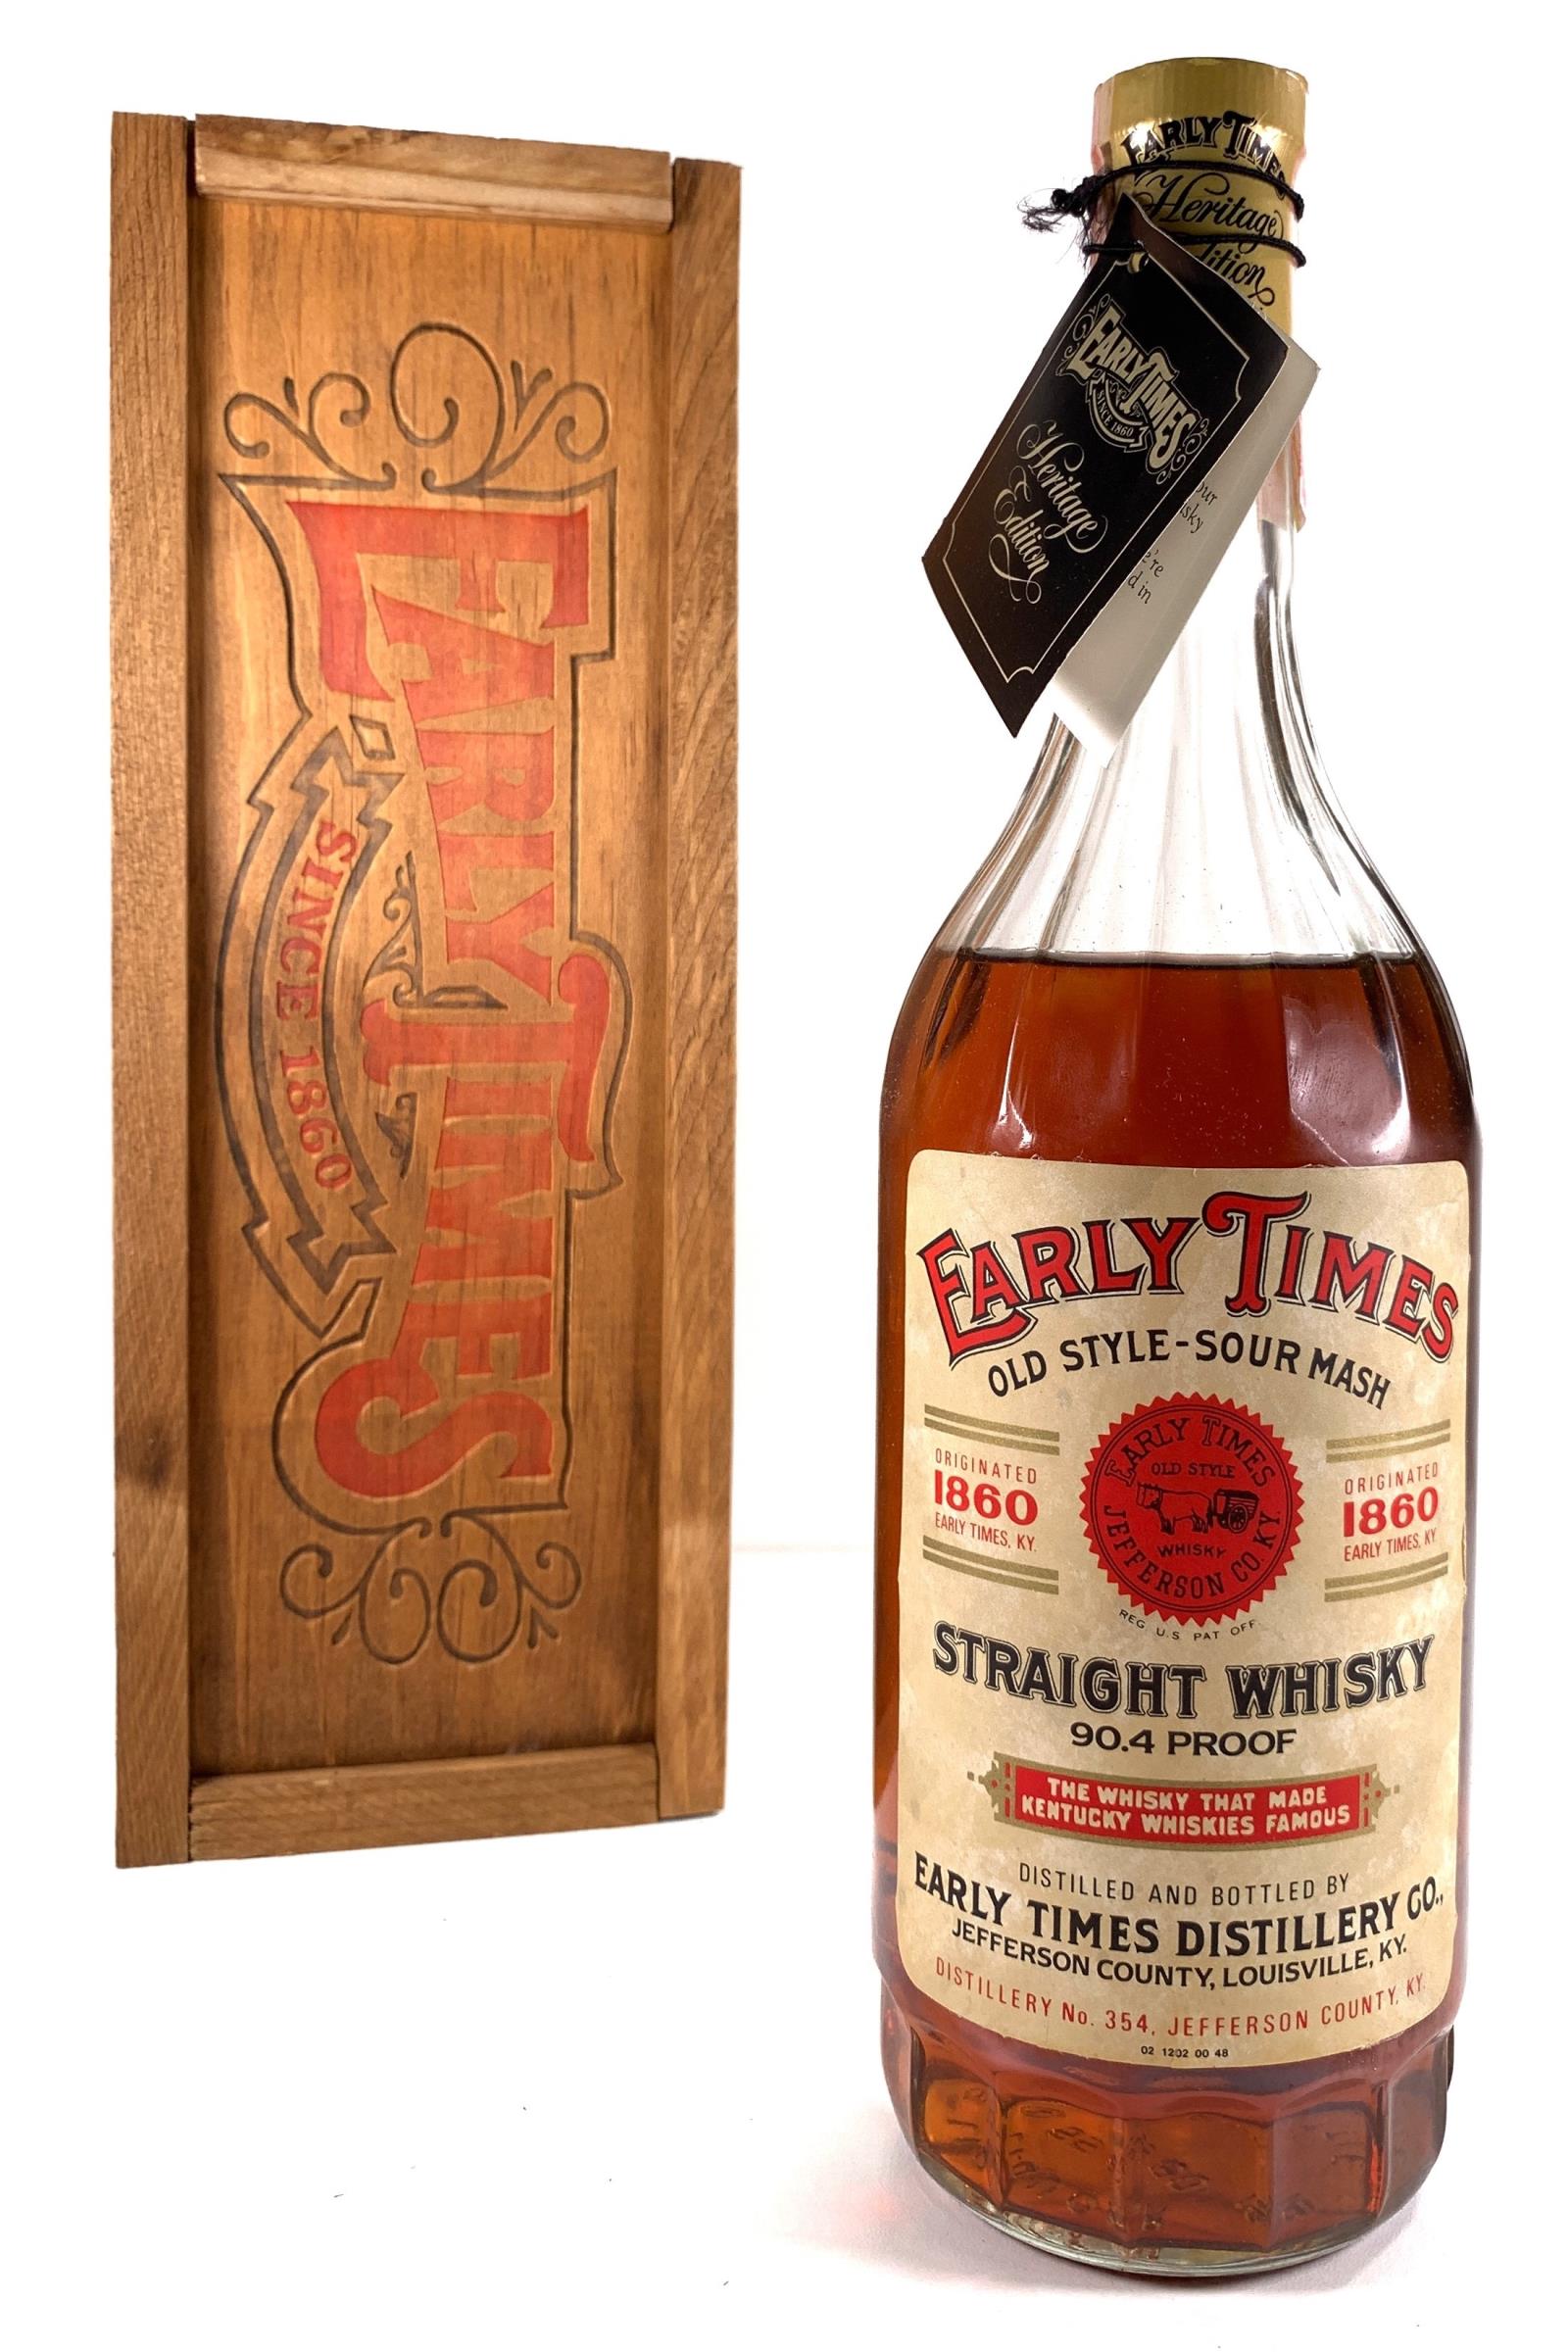 Early Times Old Style-Sour Mash Straight Whisky Heritage Edition